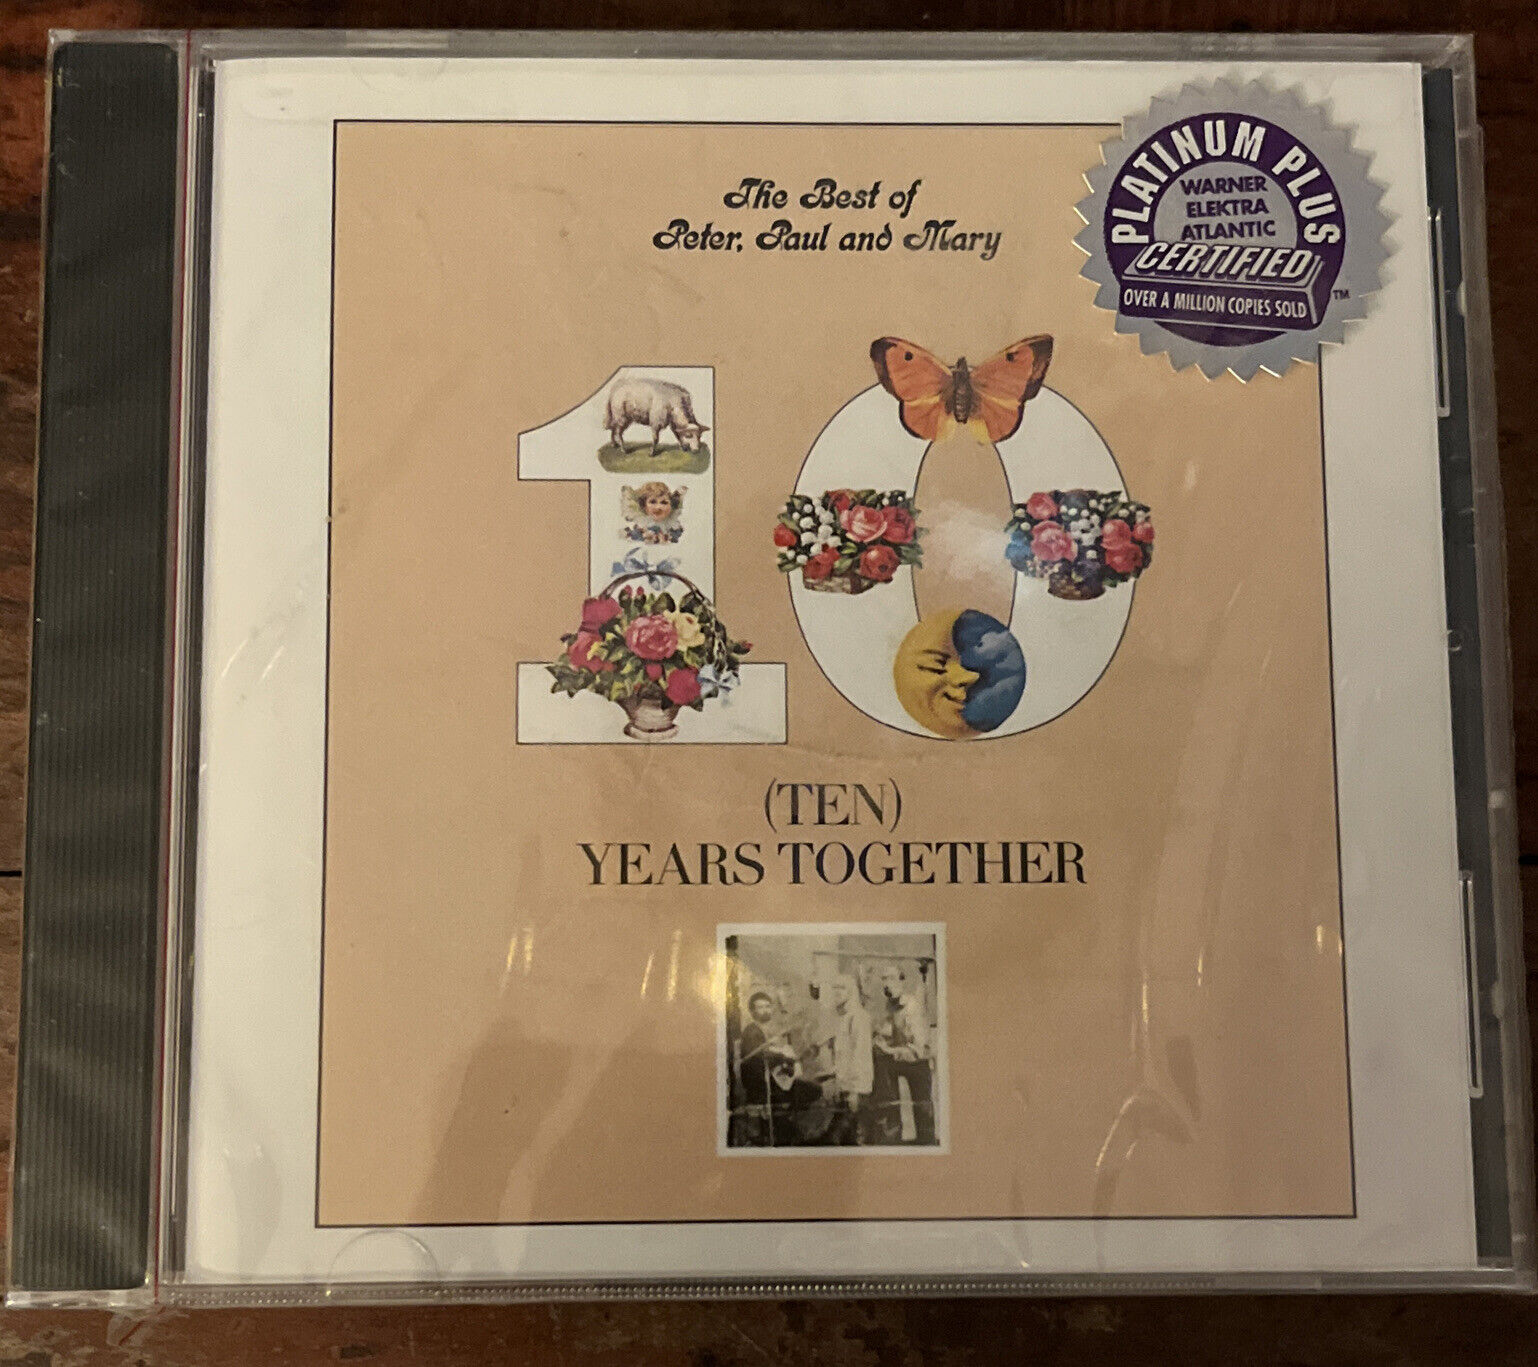 Peter, Paul and Mary : The Best Of: 10 Years Together CD Remastered Album New 